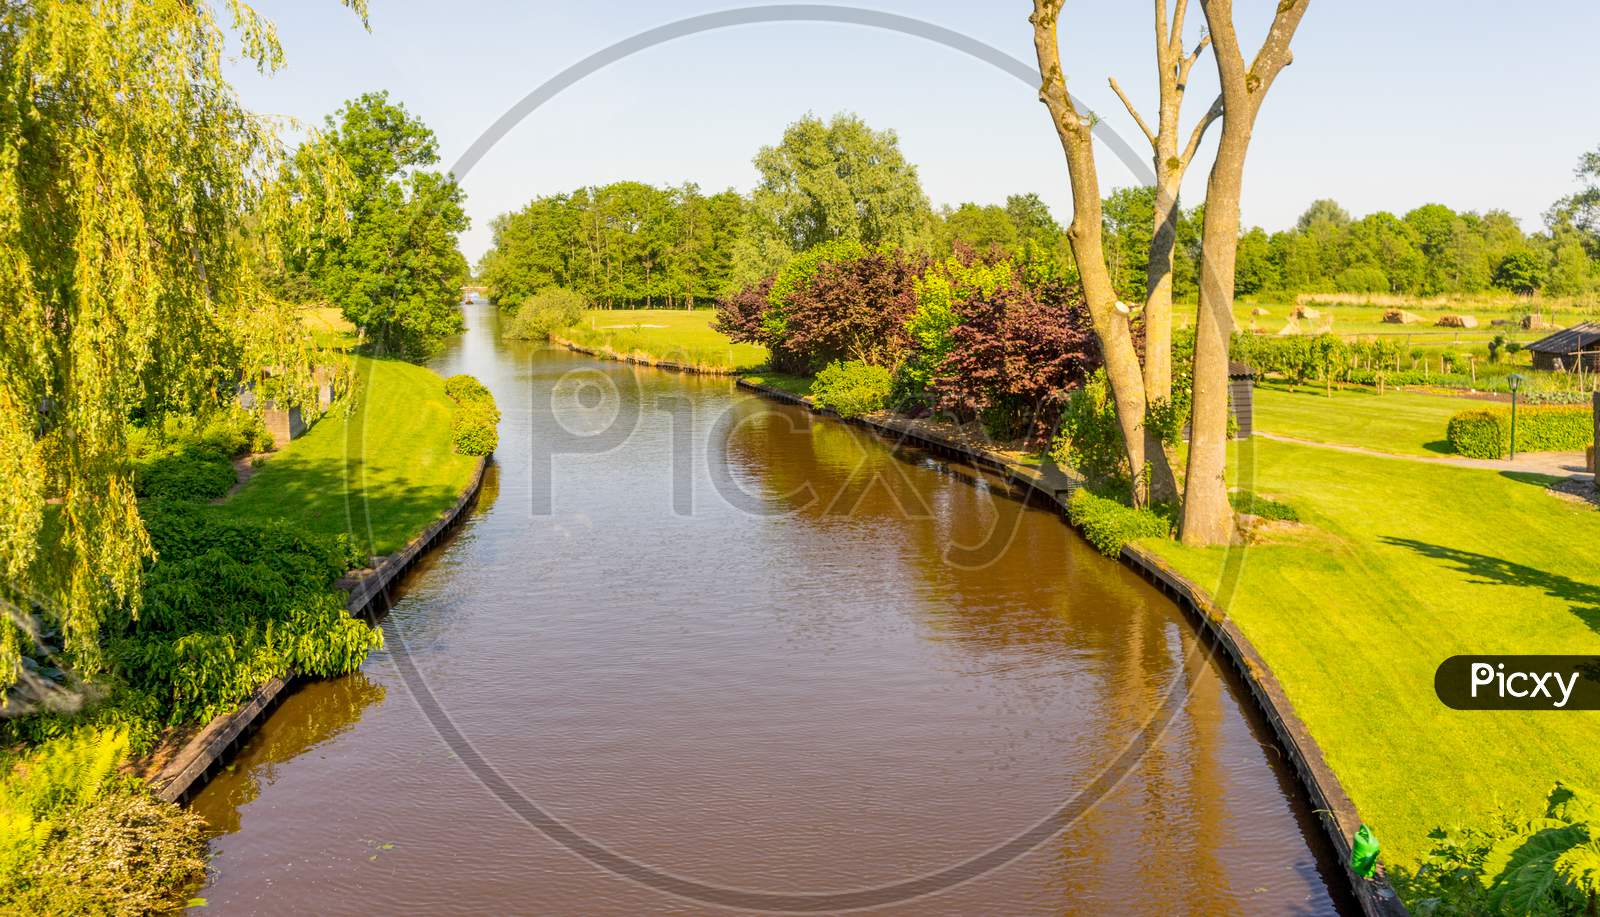 Netherlands, Giethoorn, A Canal Of Water Surrounded By Trees